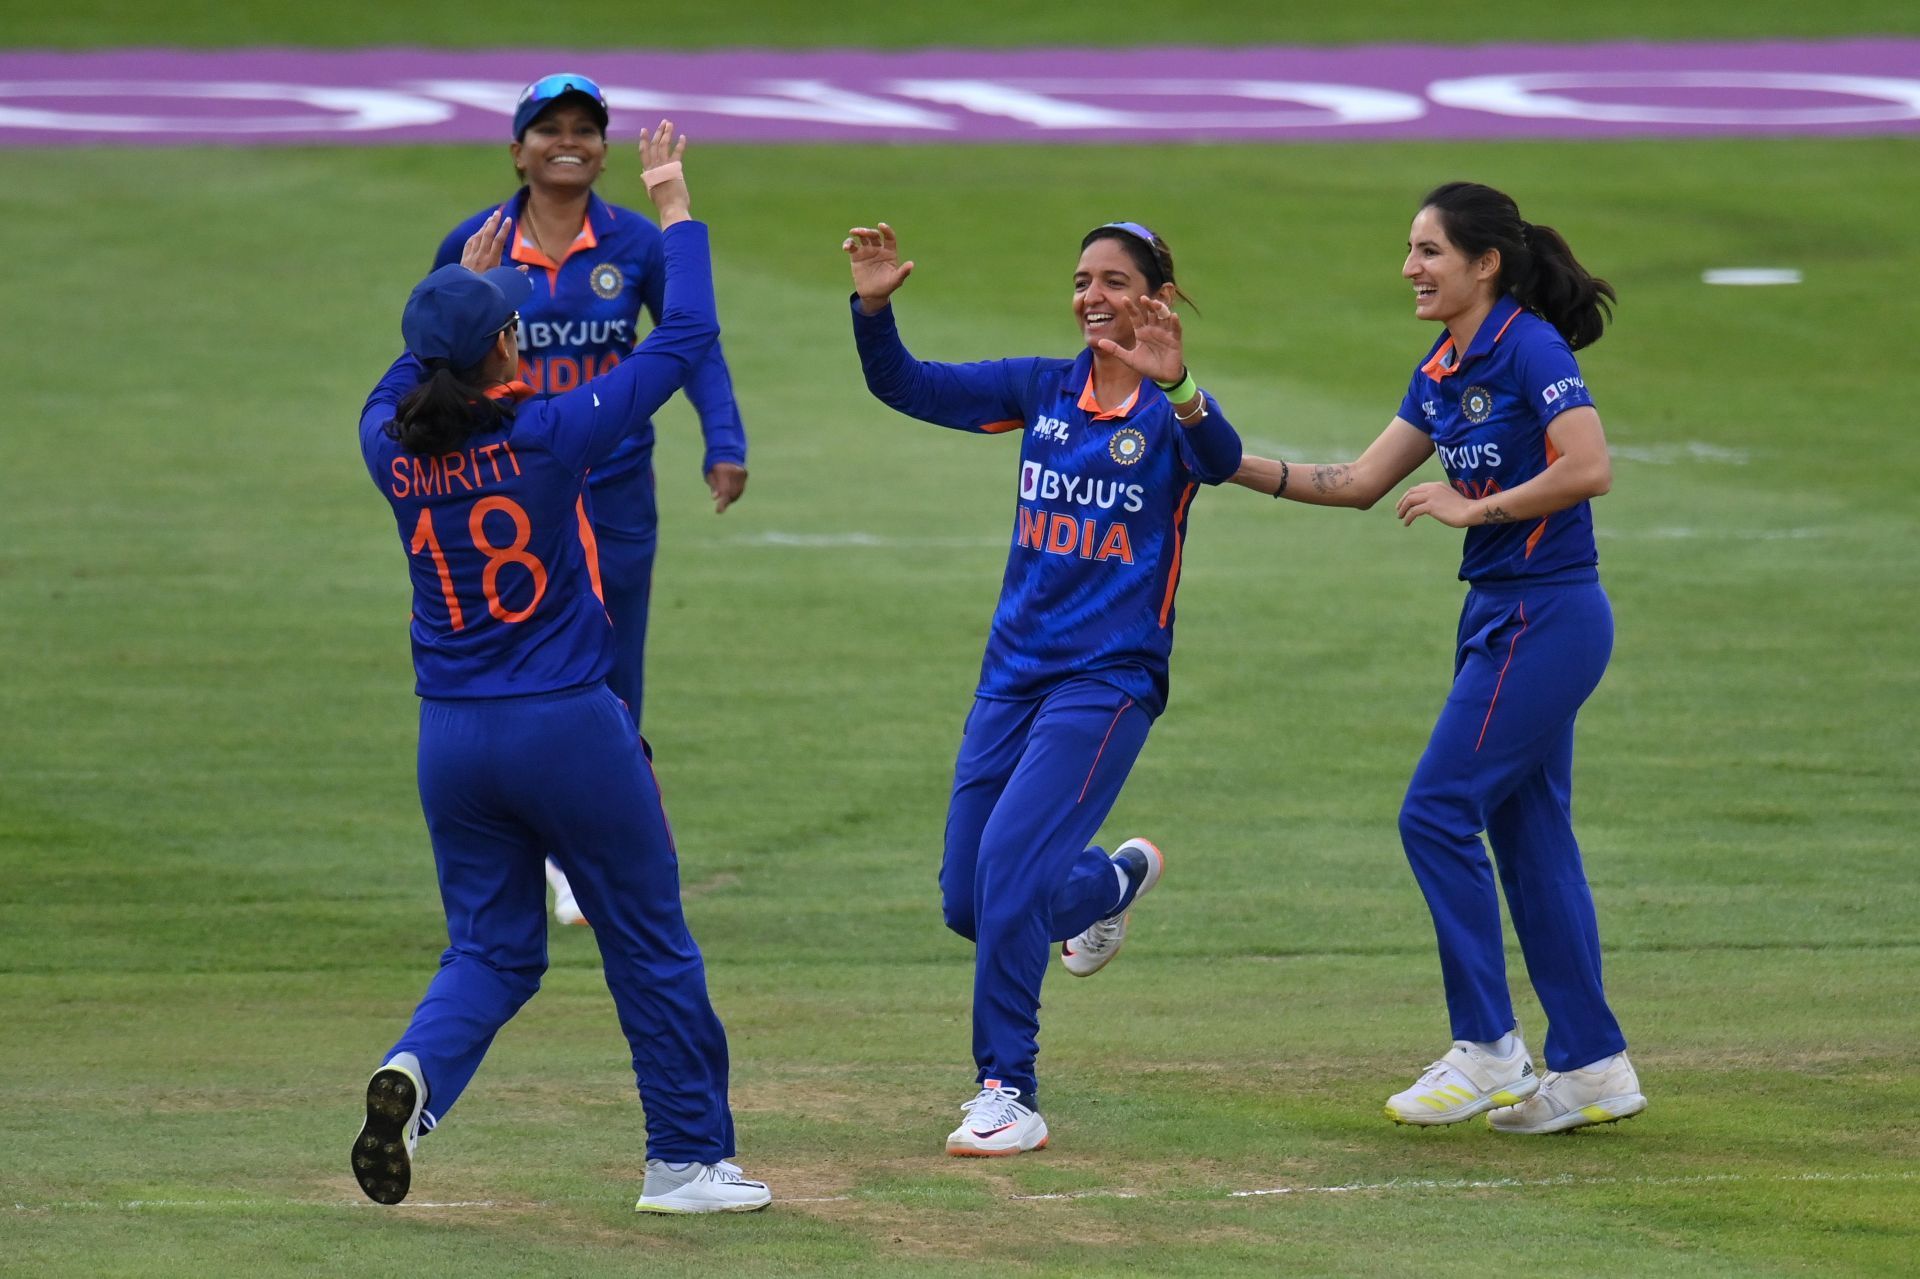 India reached the finals of the 2022 Commonwealth games and won the ODI series in England. (Credits: Getty)